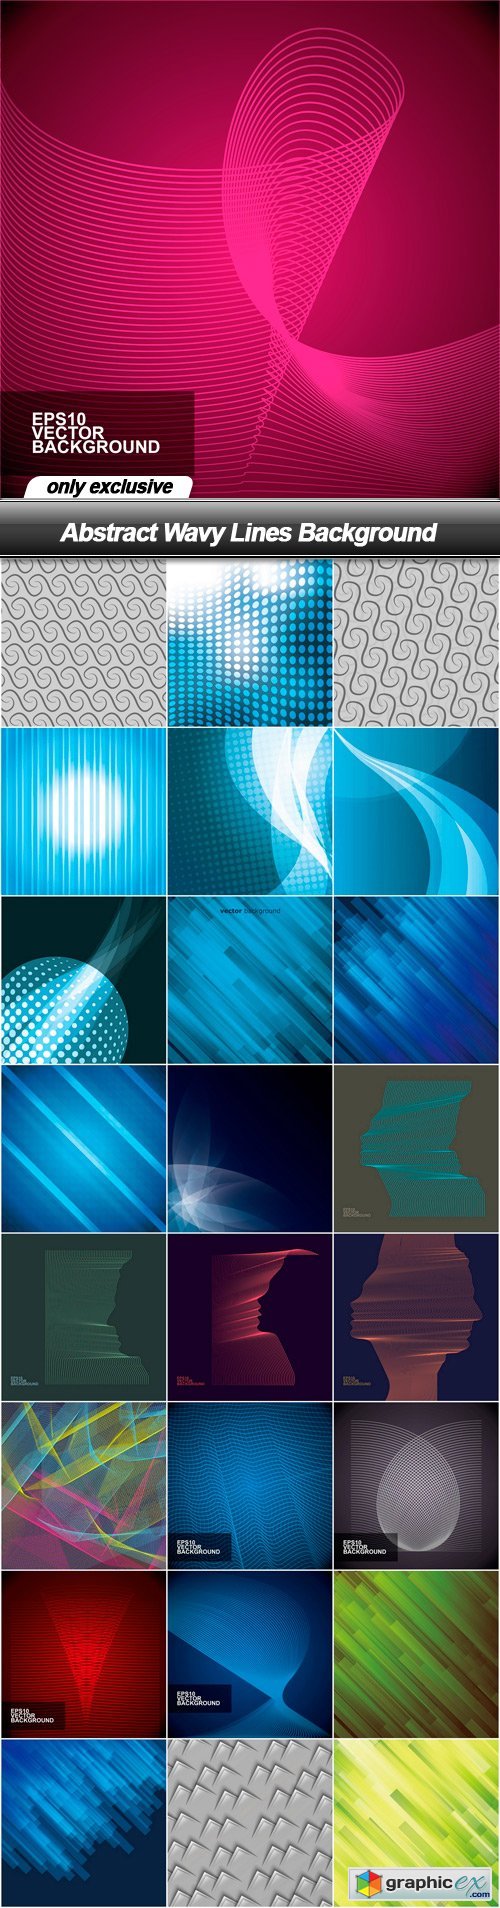 Abstract Wavy Lines Background - 25 EPS